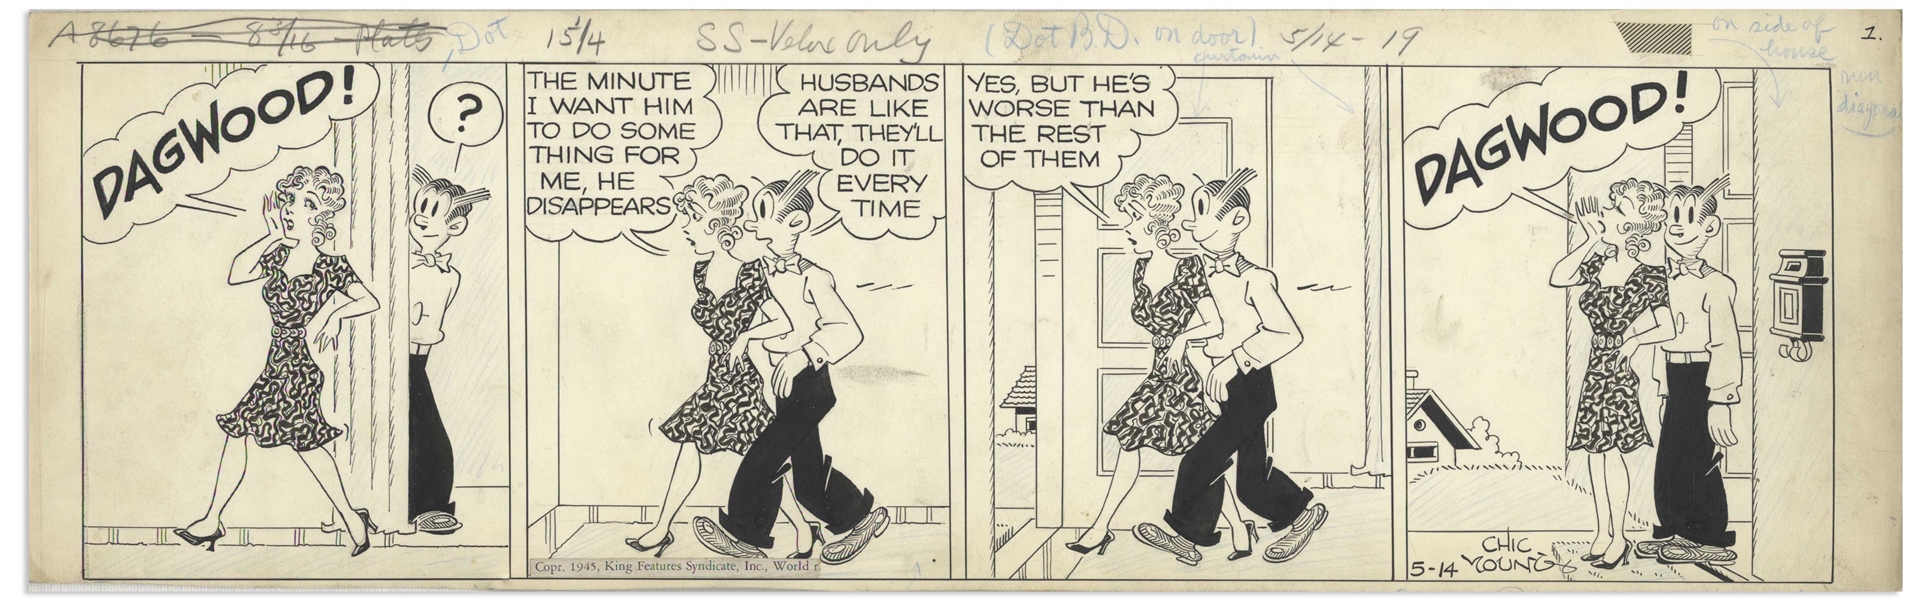 Chic Young Hand-Drawn ''Blondie'' Comic Strip From 1945 Titled ''Hike and Seek!'' -- Dagwood Breaks the Fourth Wall in This Fun Strip